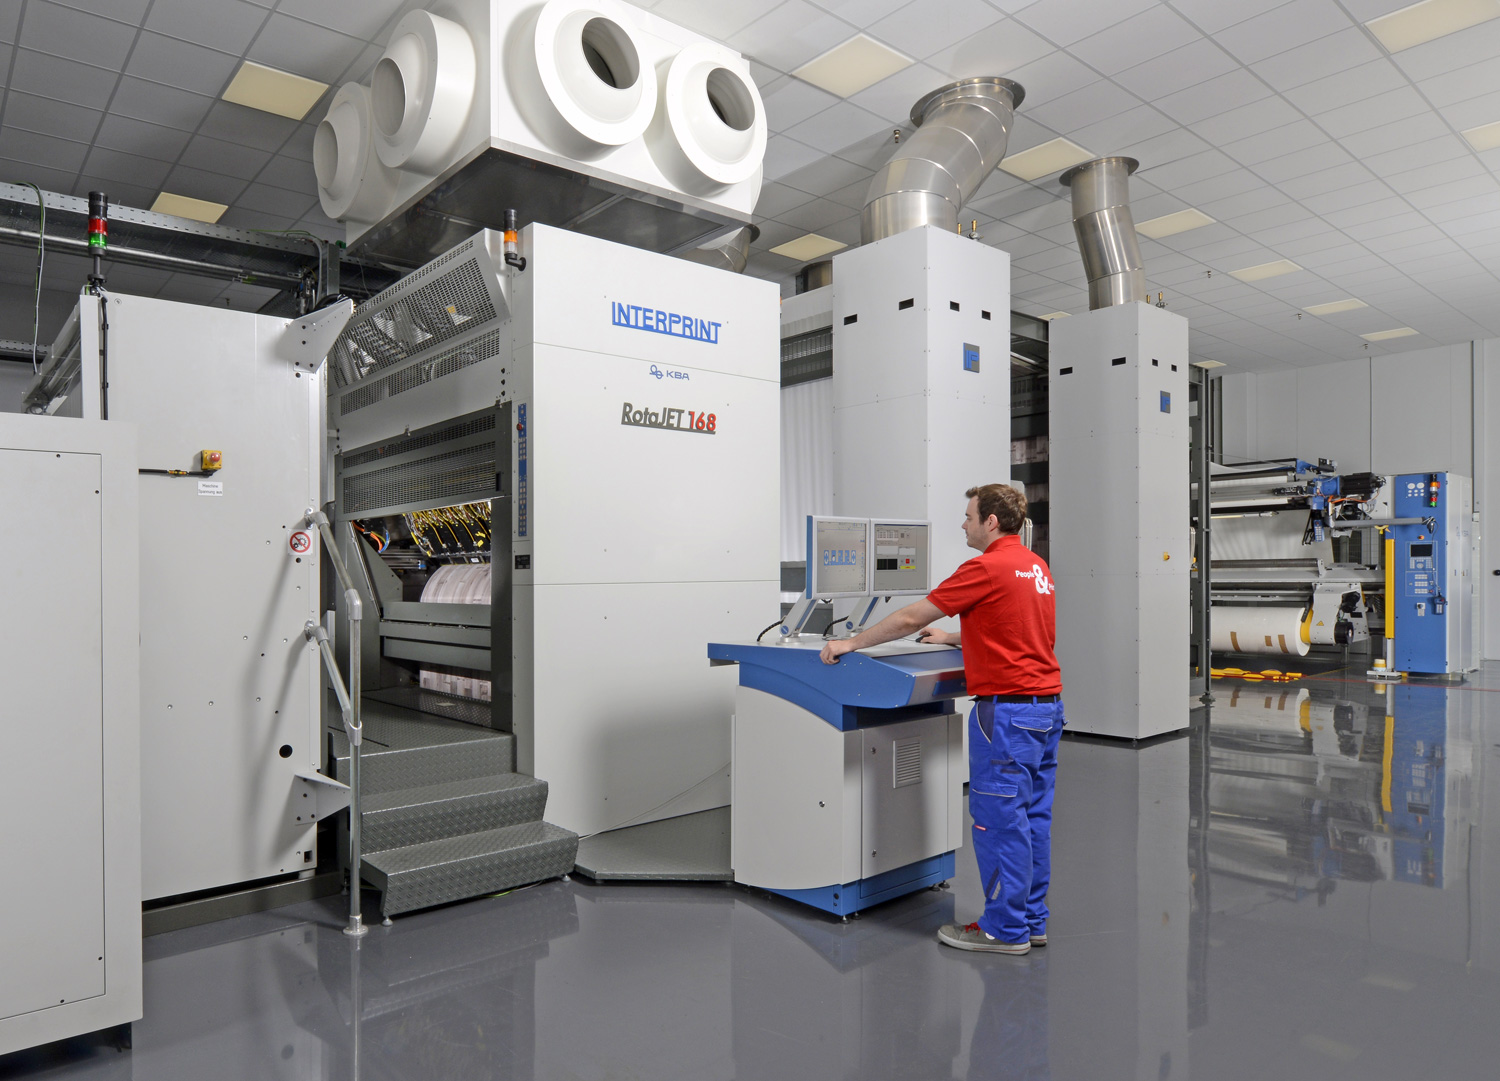 A relatively young, but future-focused business field for KBA-Digital & Web is digital decorative printing with the up to 2.25m-wide RotaJET VL presses. The first has been in operation for some months at decor manufacturer Interprint in Arnsberg, Germany